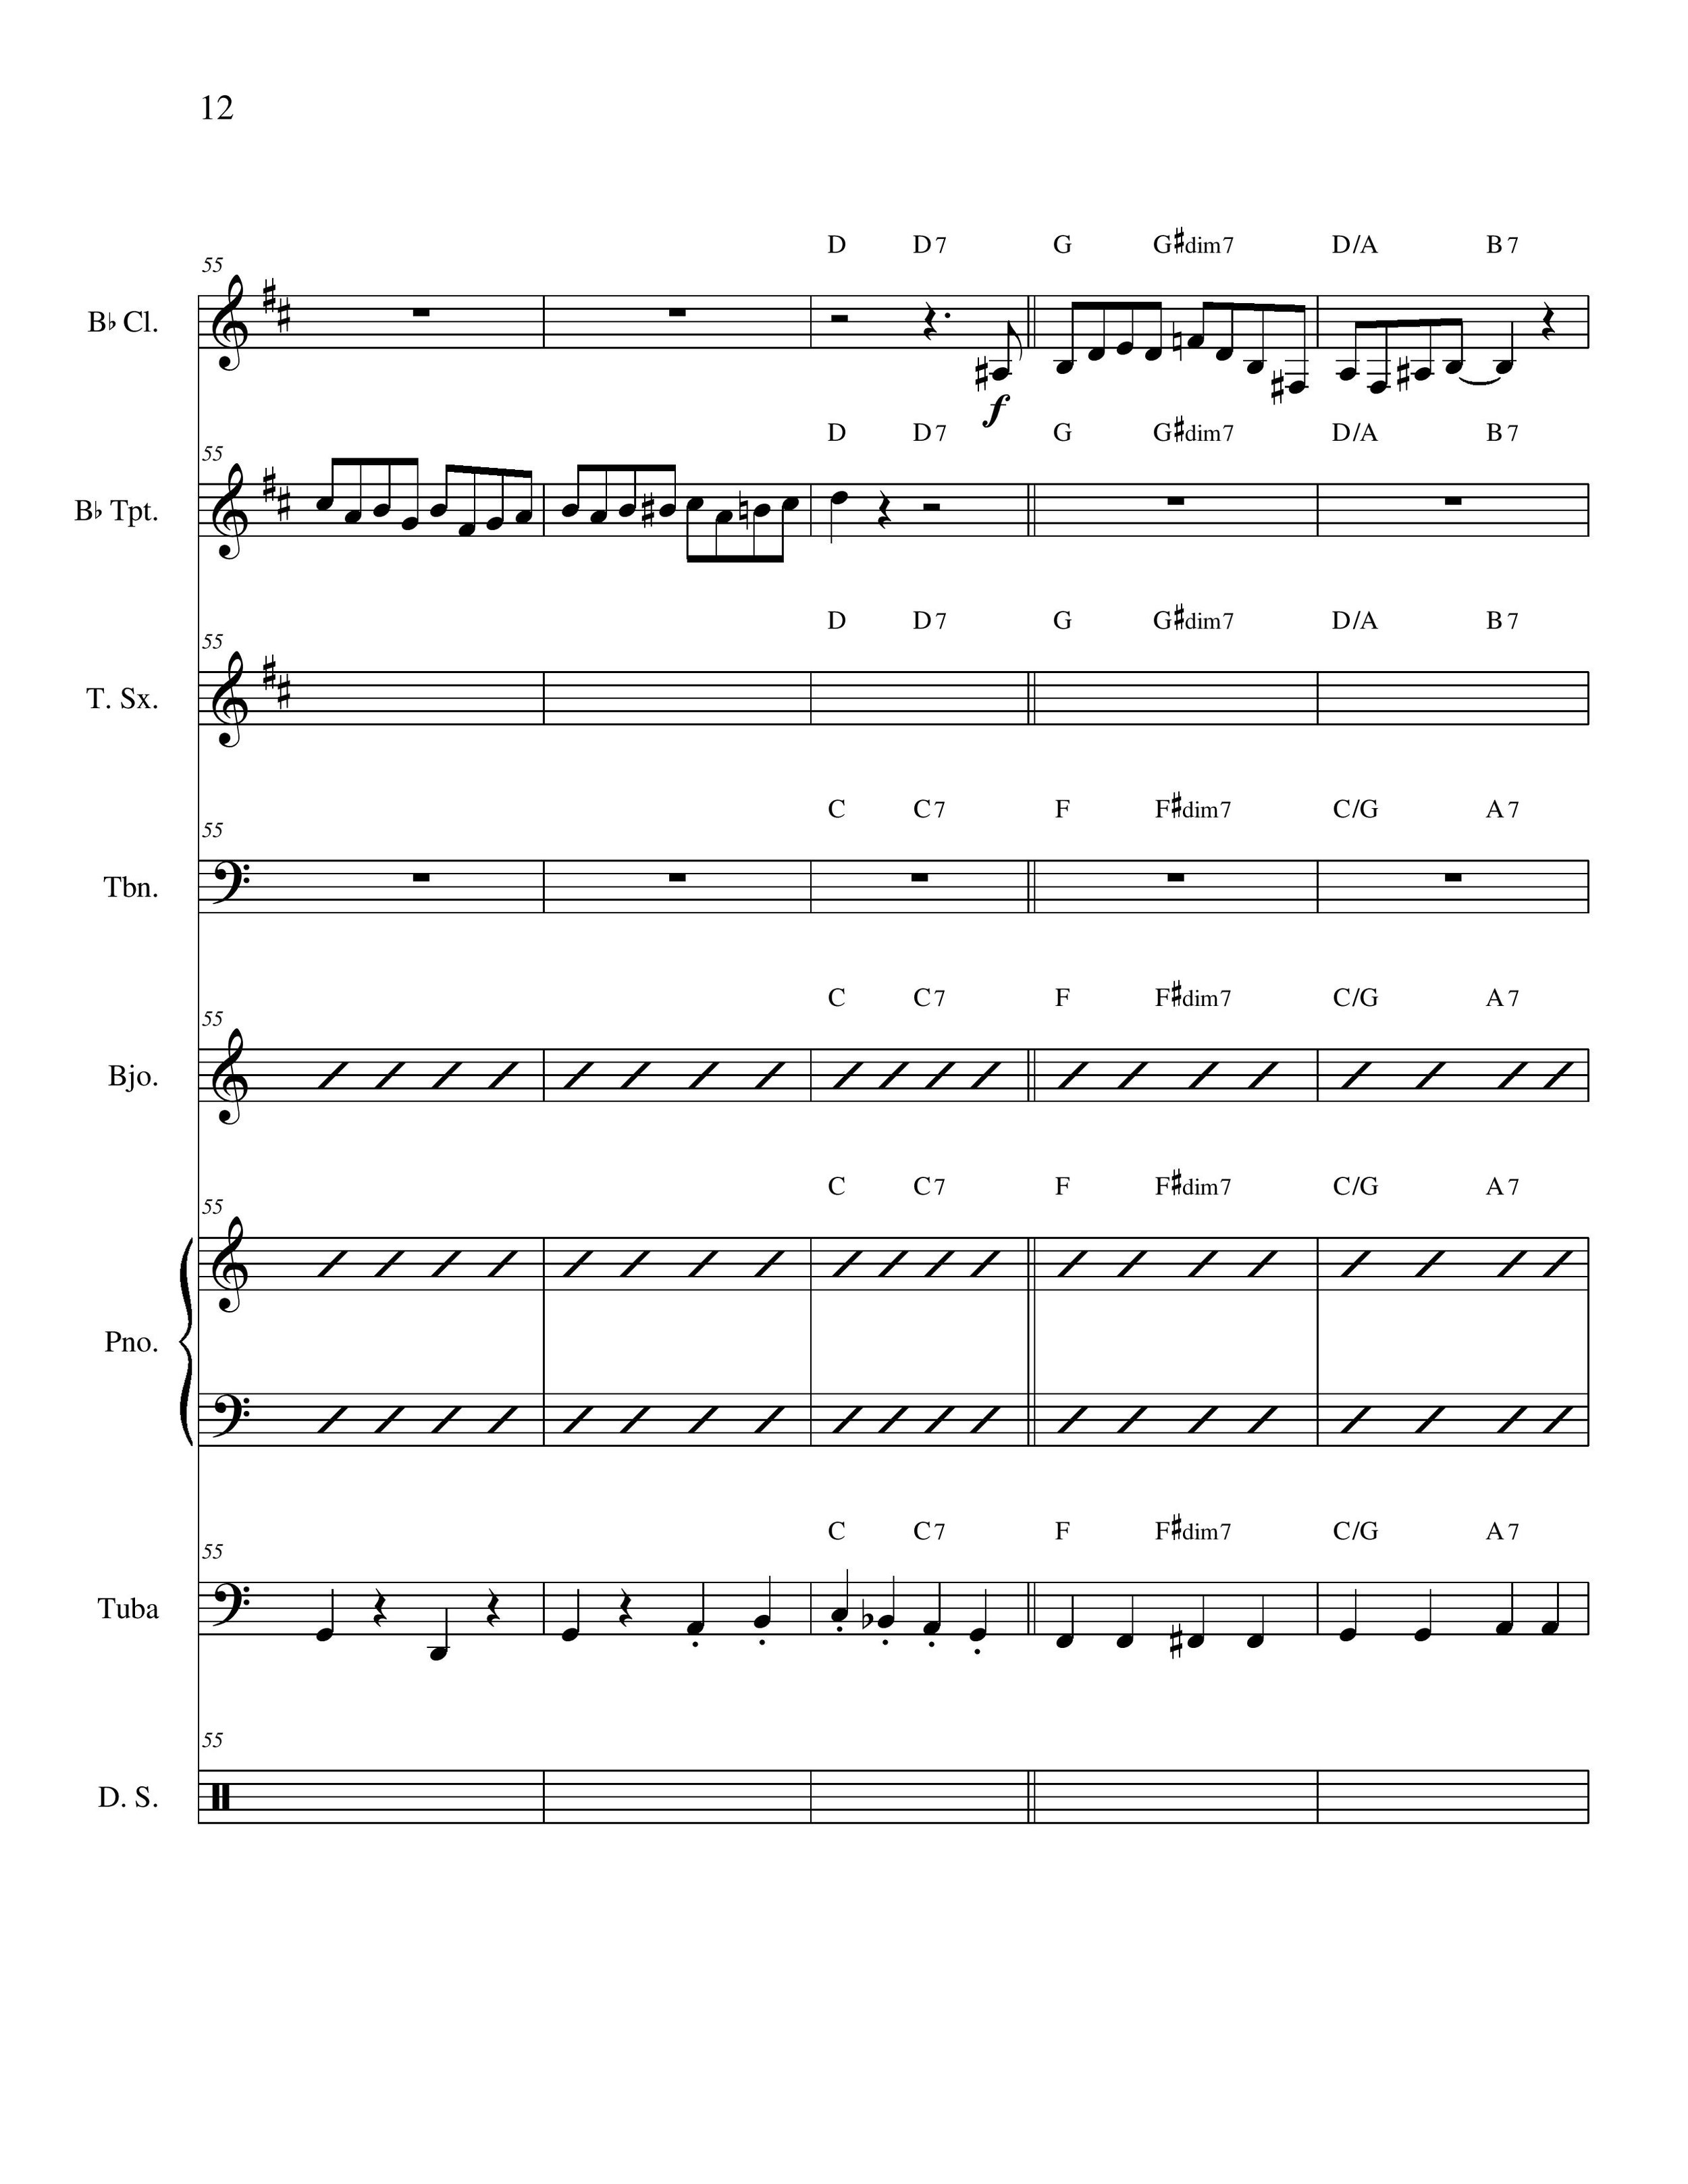 Rudolph the Red-Nosed Reindeer - Score_12.jpg